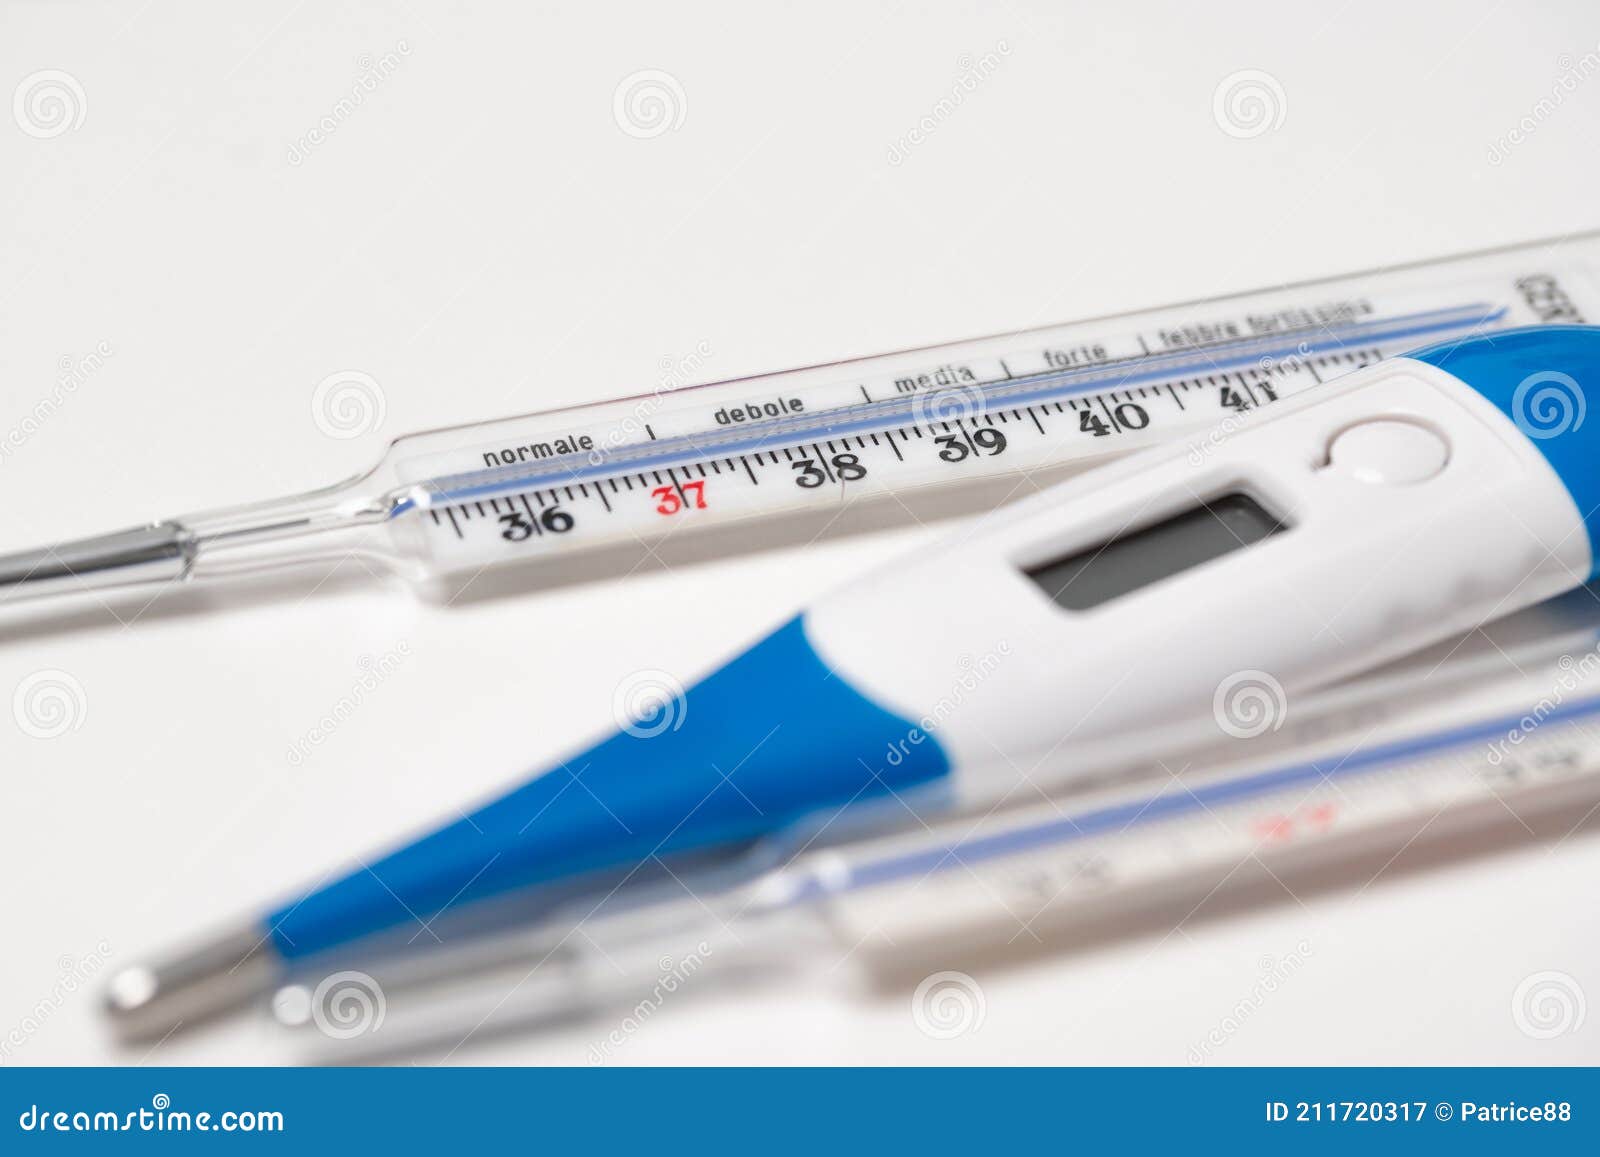 https://thumbs.dreamstime.com/z/analog-digital-thermometer-white-background-fever-thermometers-measuring-high-temperature-fever-due-to-illness-analog-211720317.jpg